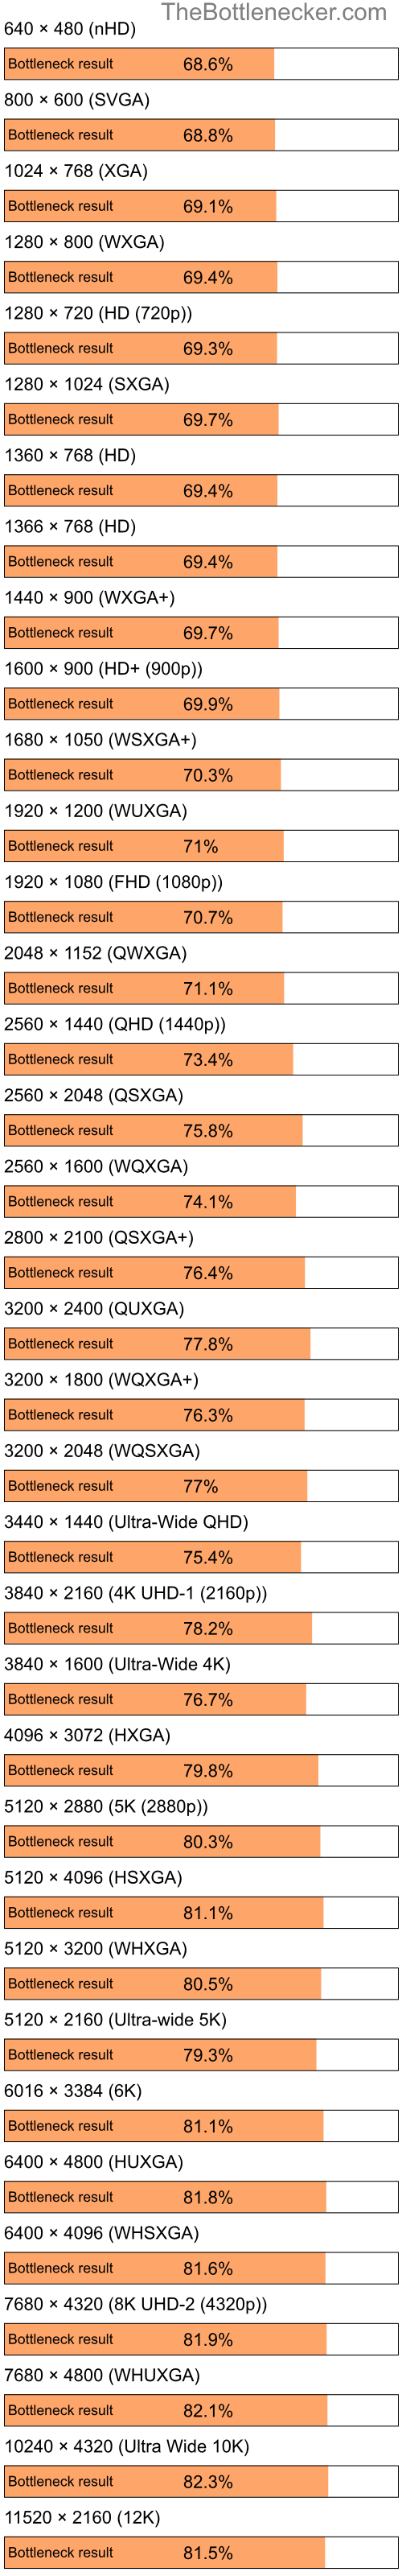 Bottleneck results by resolution for Intel Pentium 4 and NVIDIA nForce 630a in Processor Intense Tasks